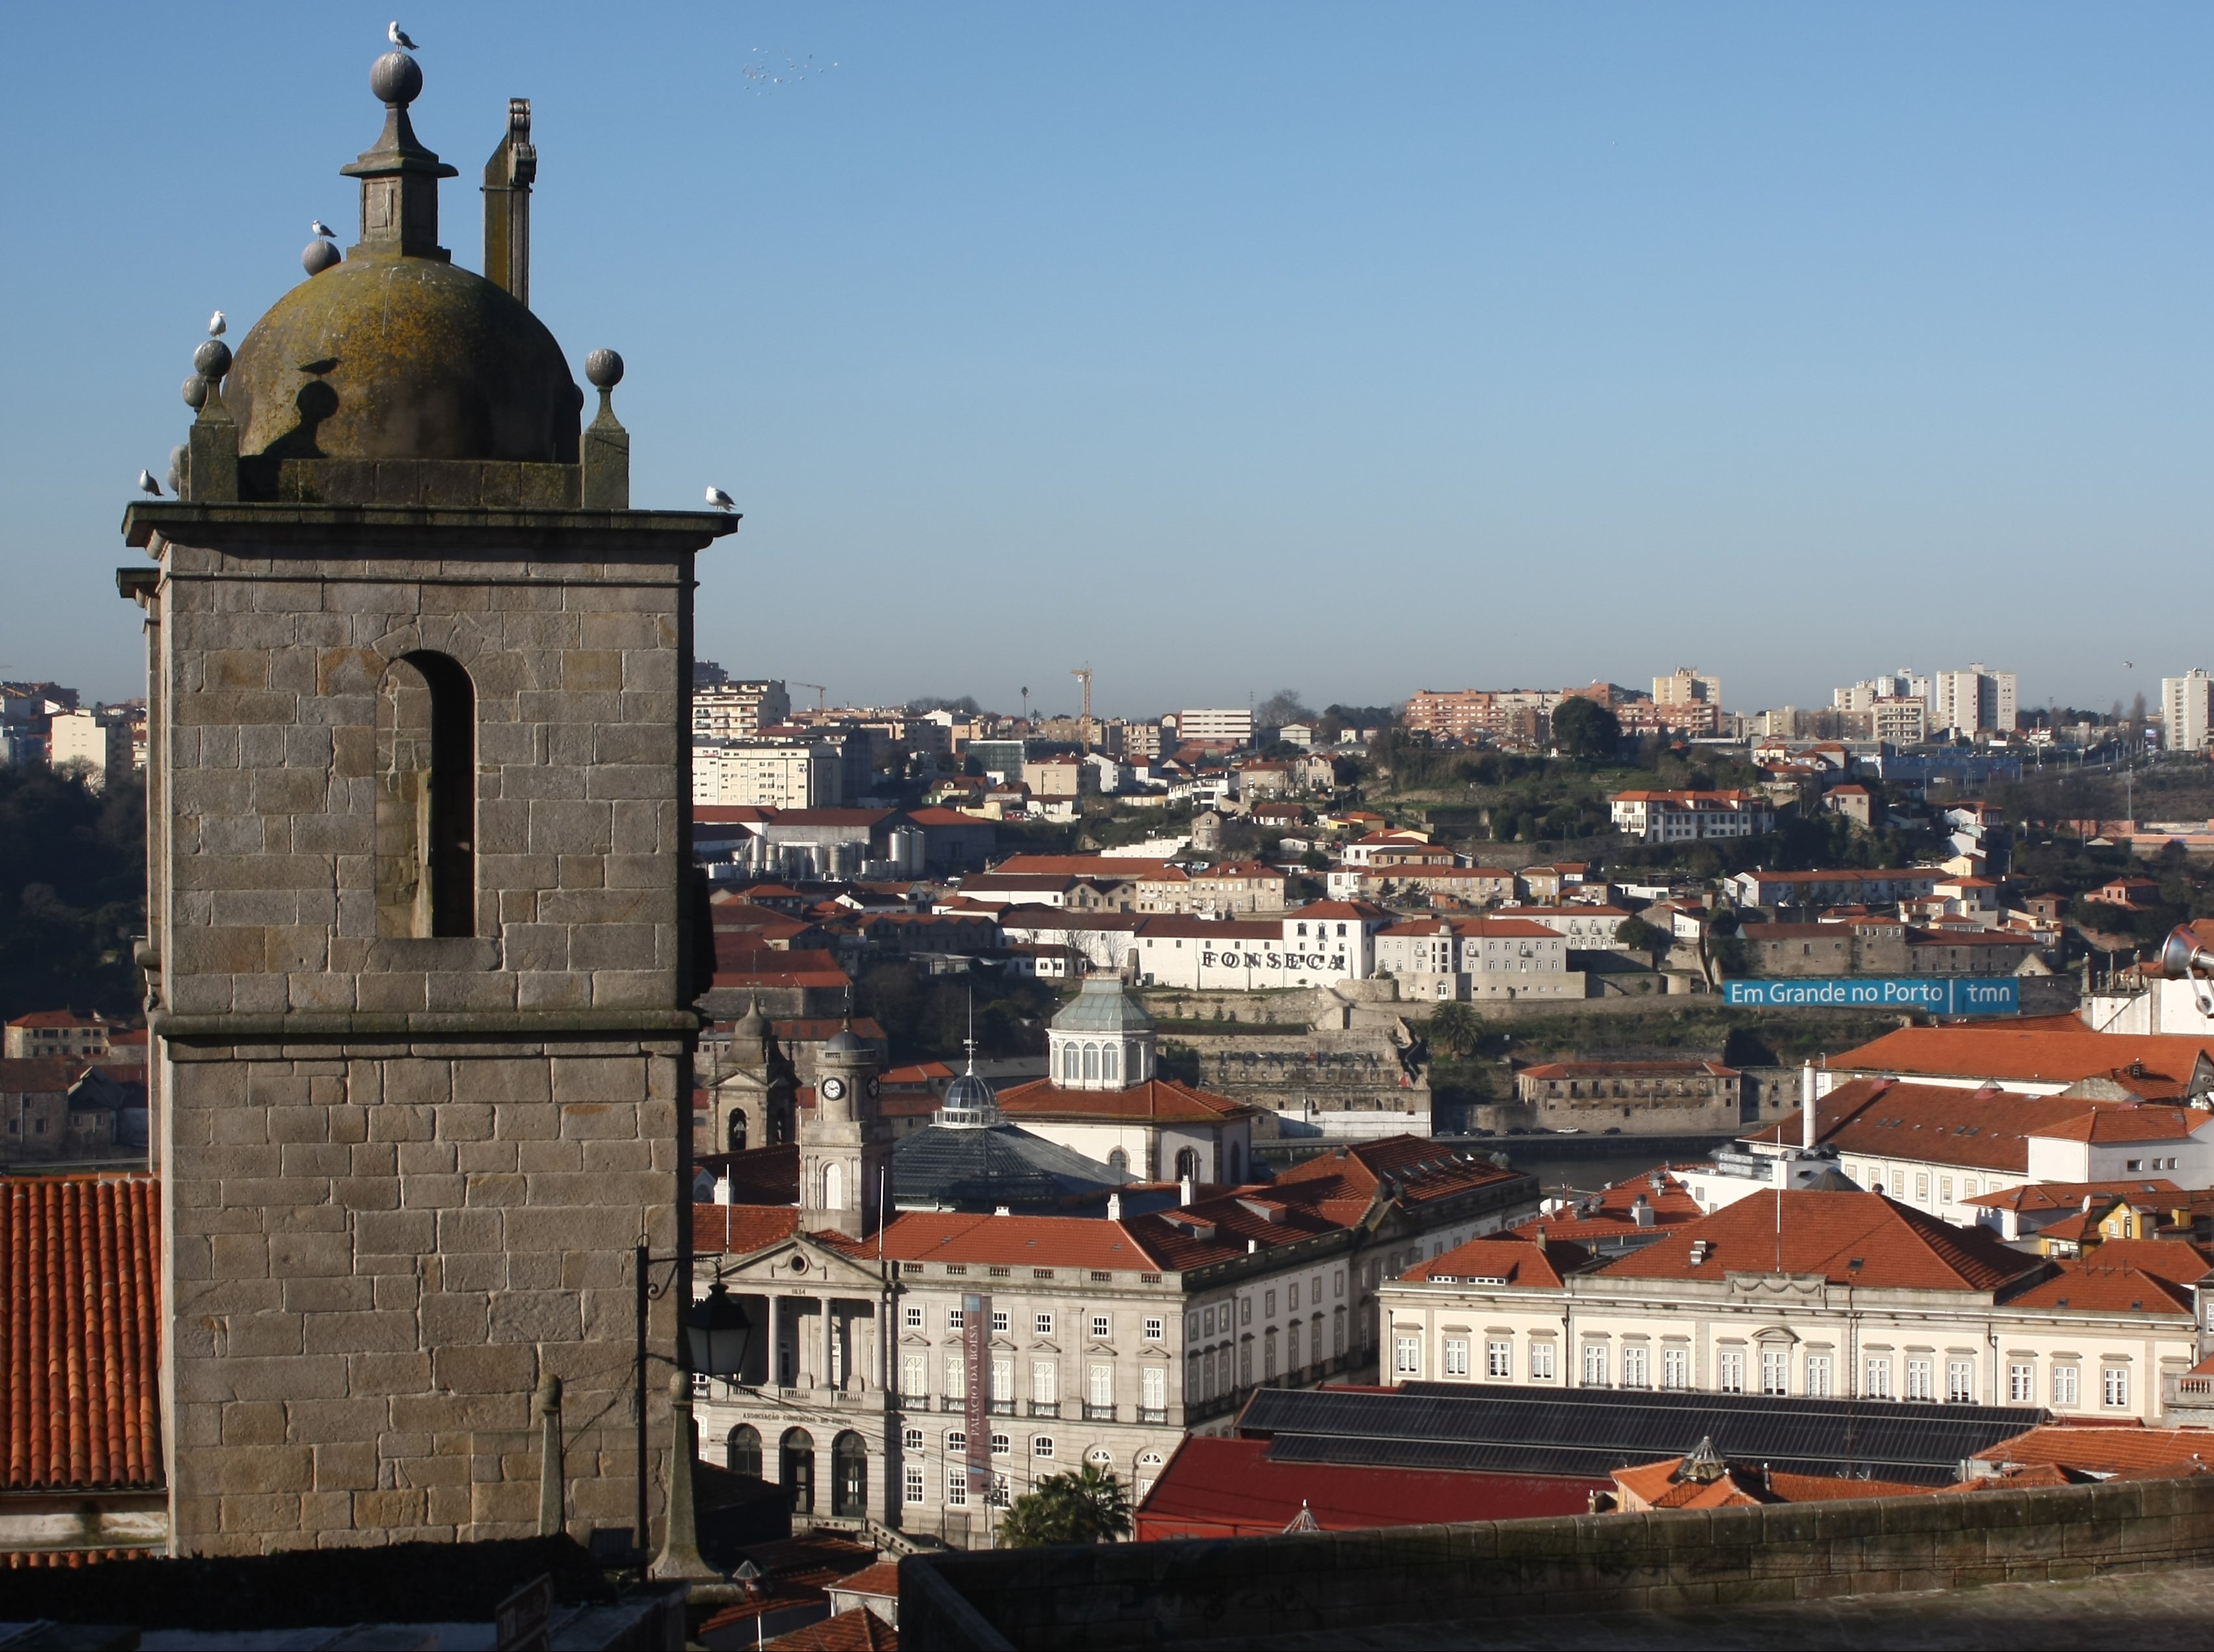 Porto farewell: the destination for the final flight from the UK to Portugal for a while